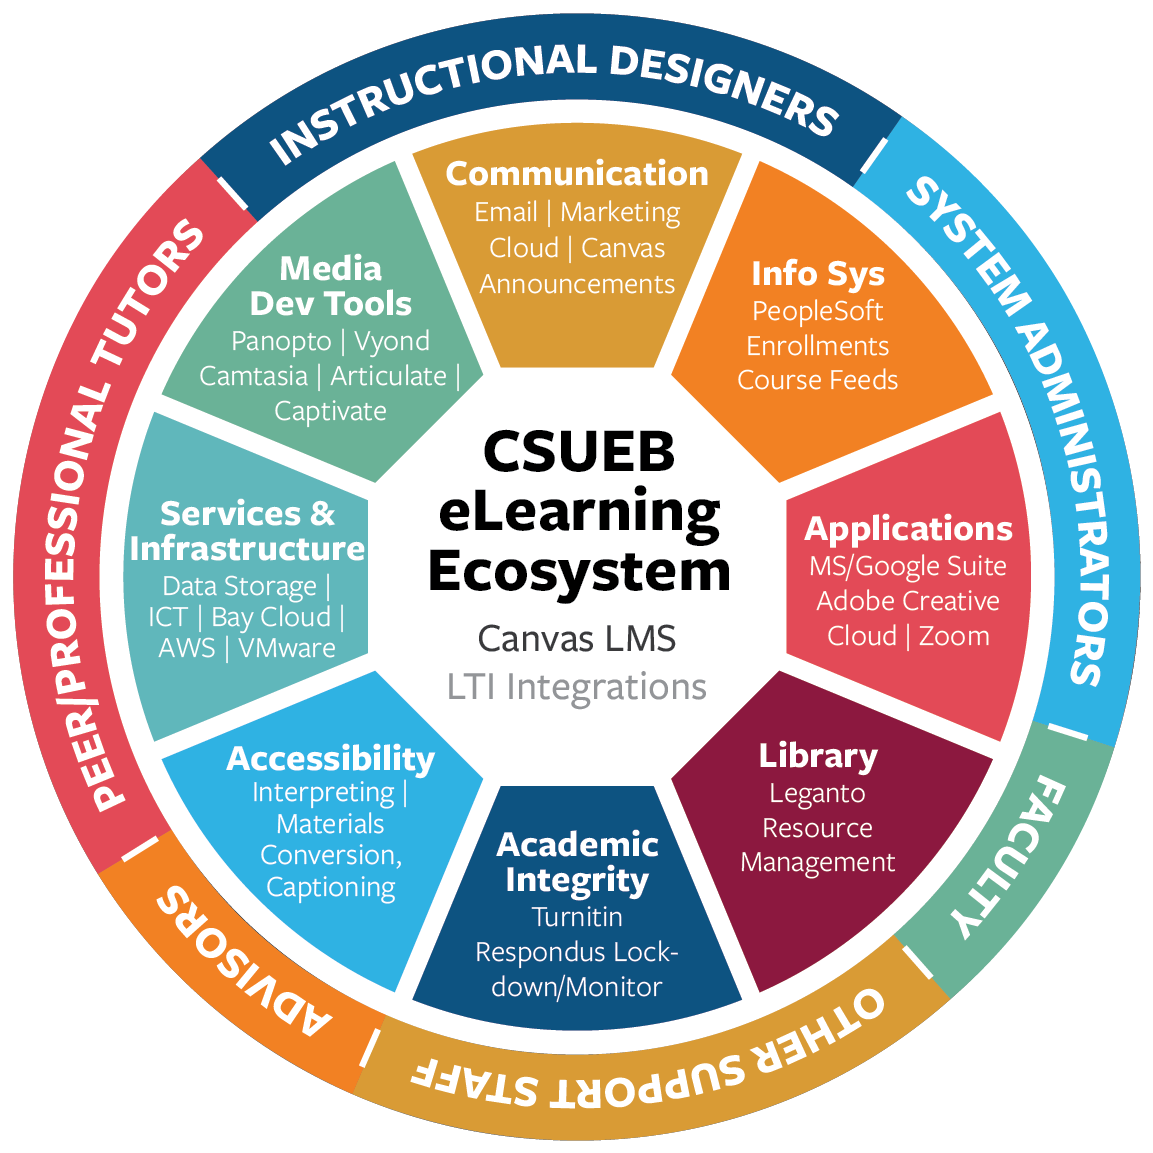 Icon graphic representing CSUEB eLearning Ecosystem. An eLearning ecosystem that brings a human approach with Instructional Designer, System Administrators, Faculty, Advisors and Peer/Professional Tutors. It also brings digital tools and technologies to create engaging and personalized learning experiences focused around Canvas Learning Management System. 